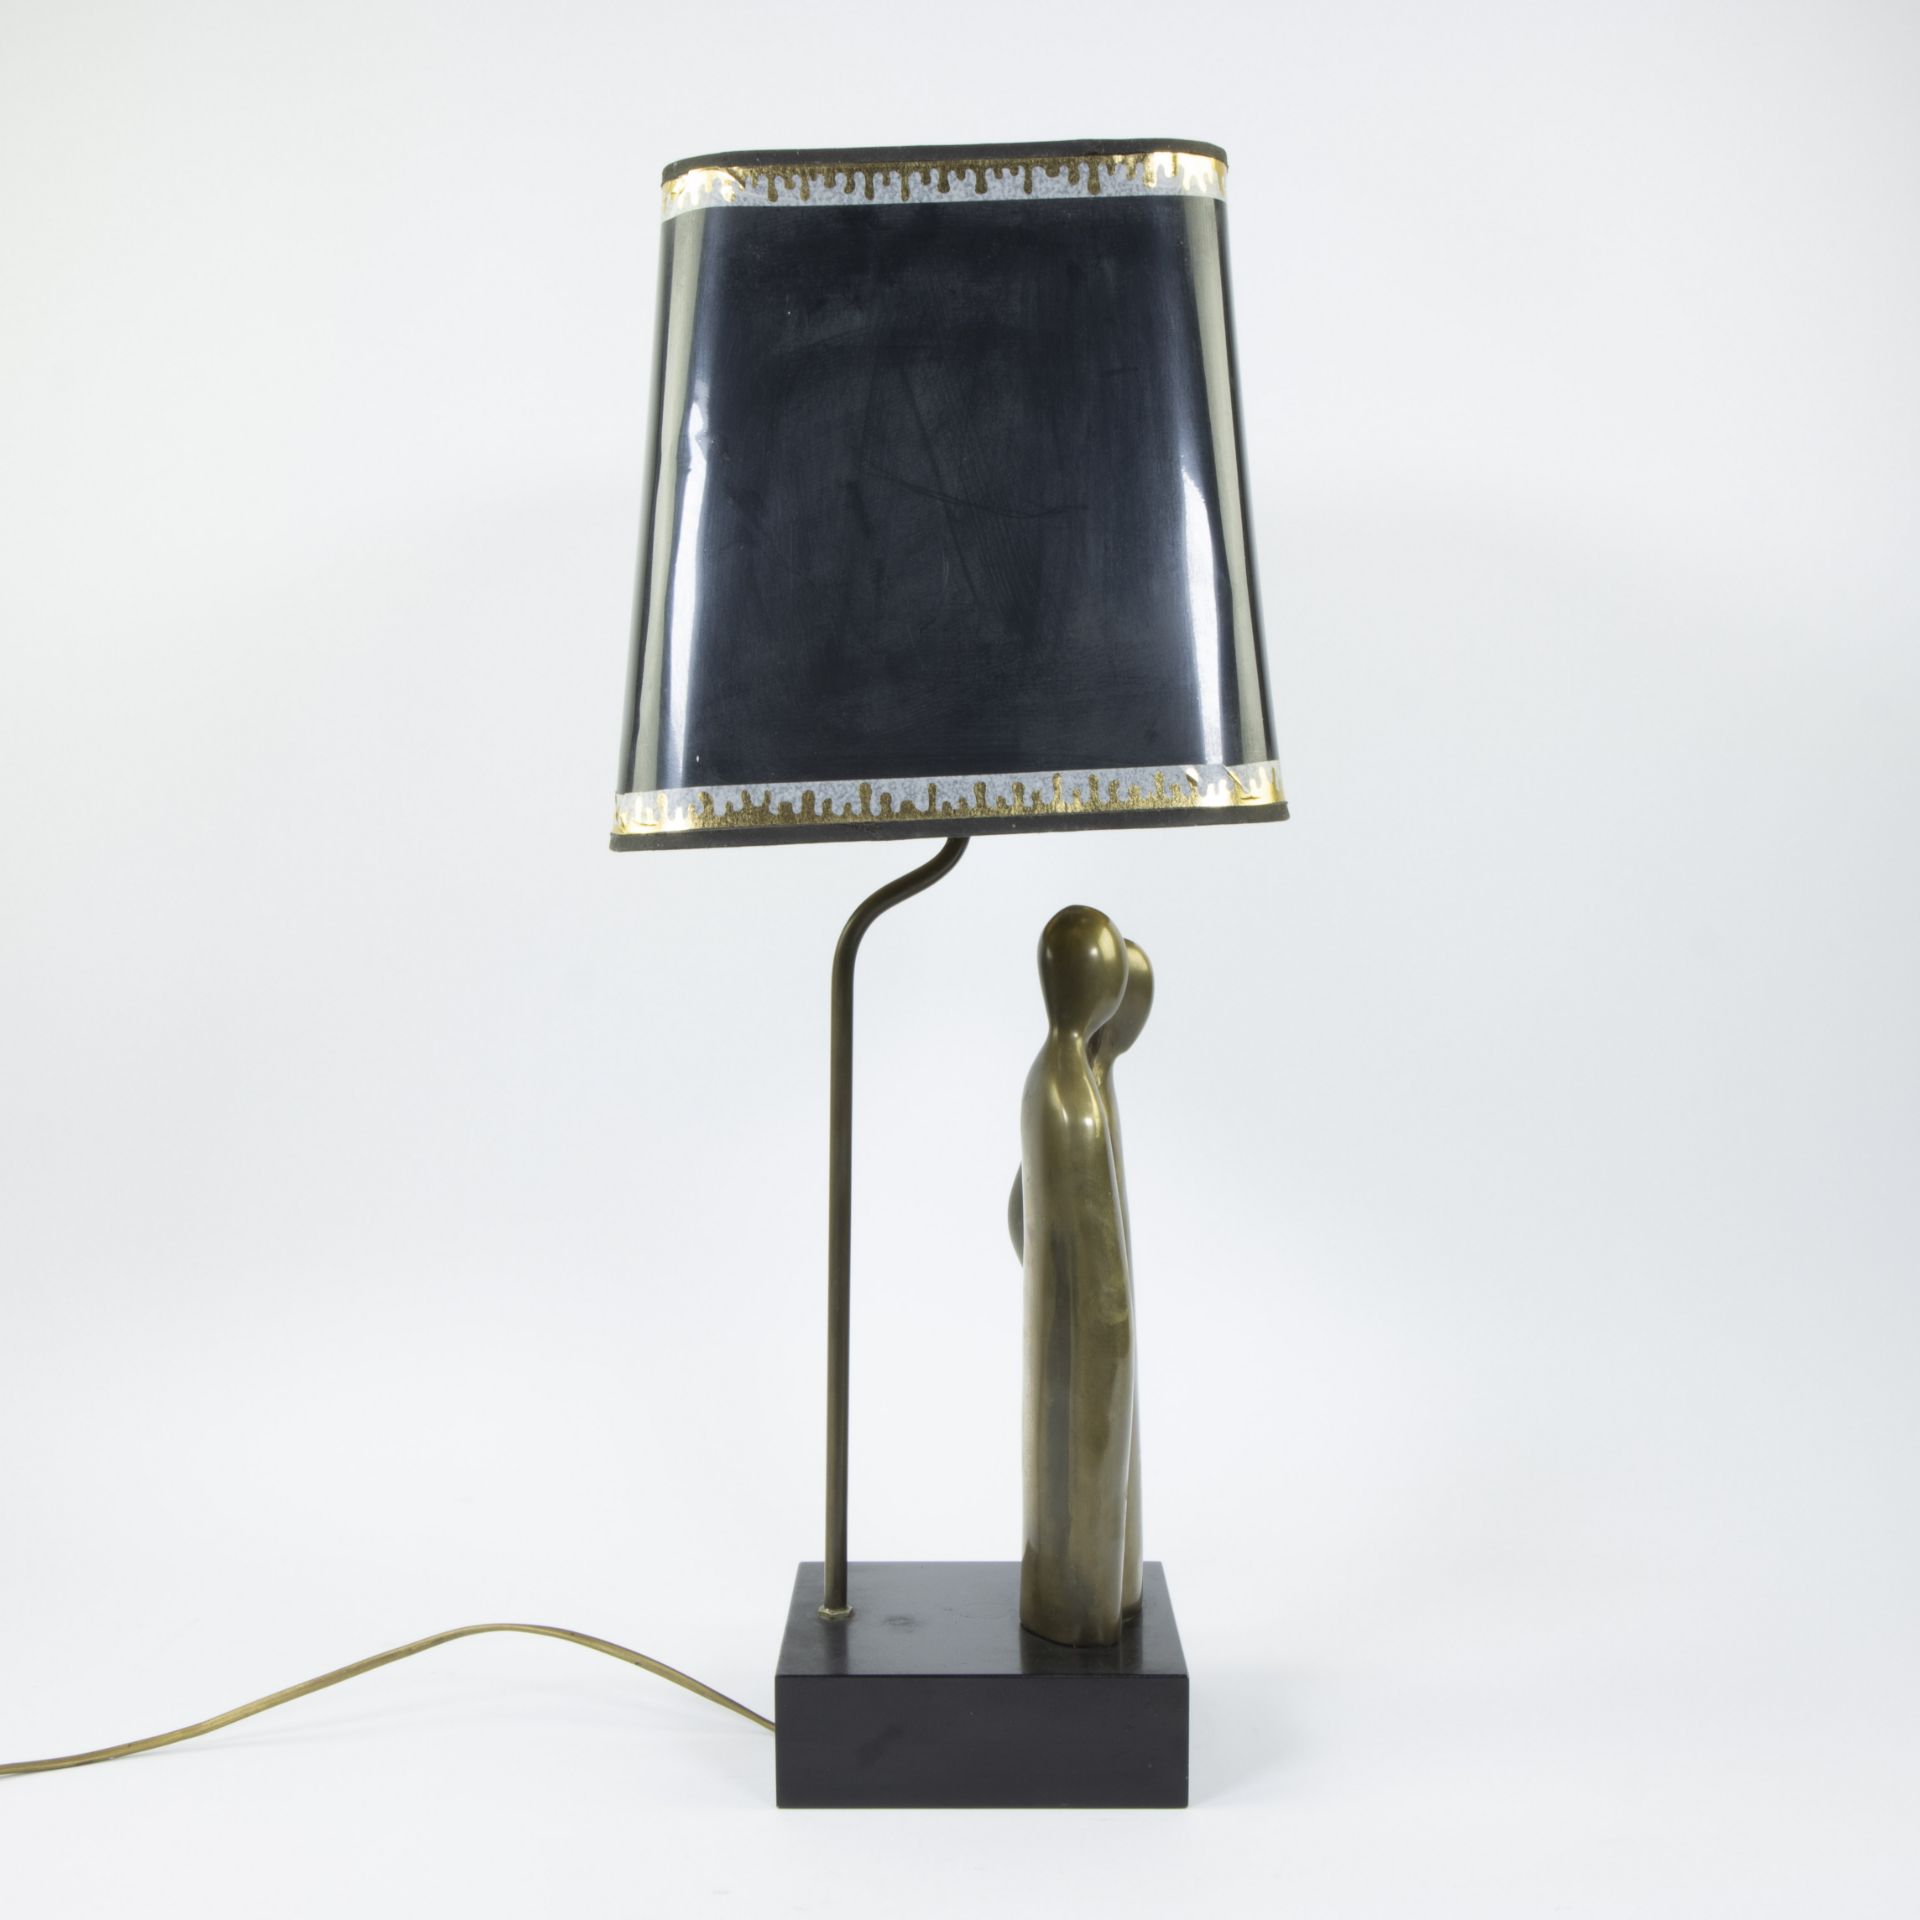 Vintage brass table lamp, style Maison Charles - Image 2 of 4